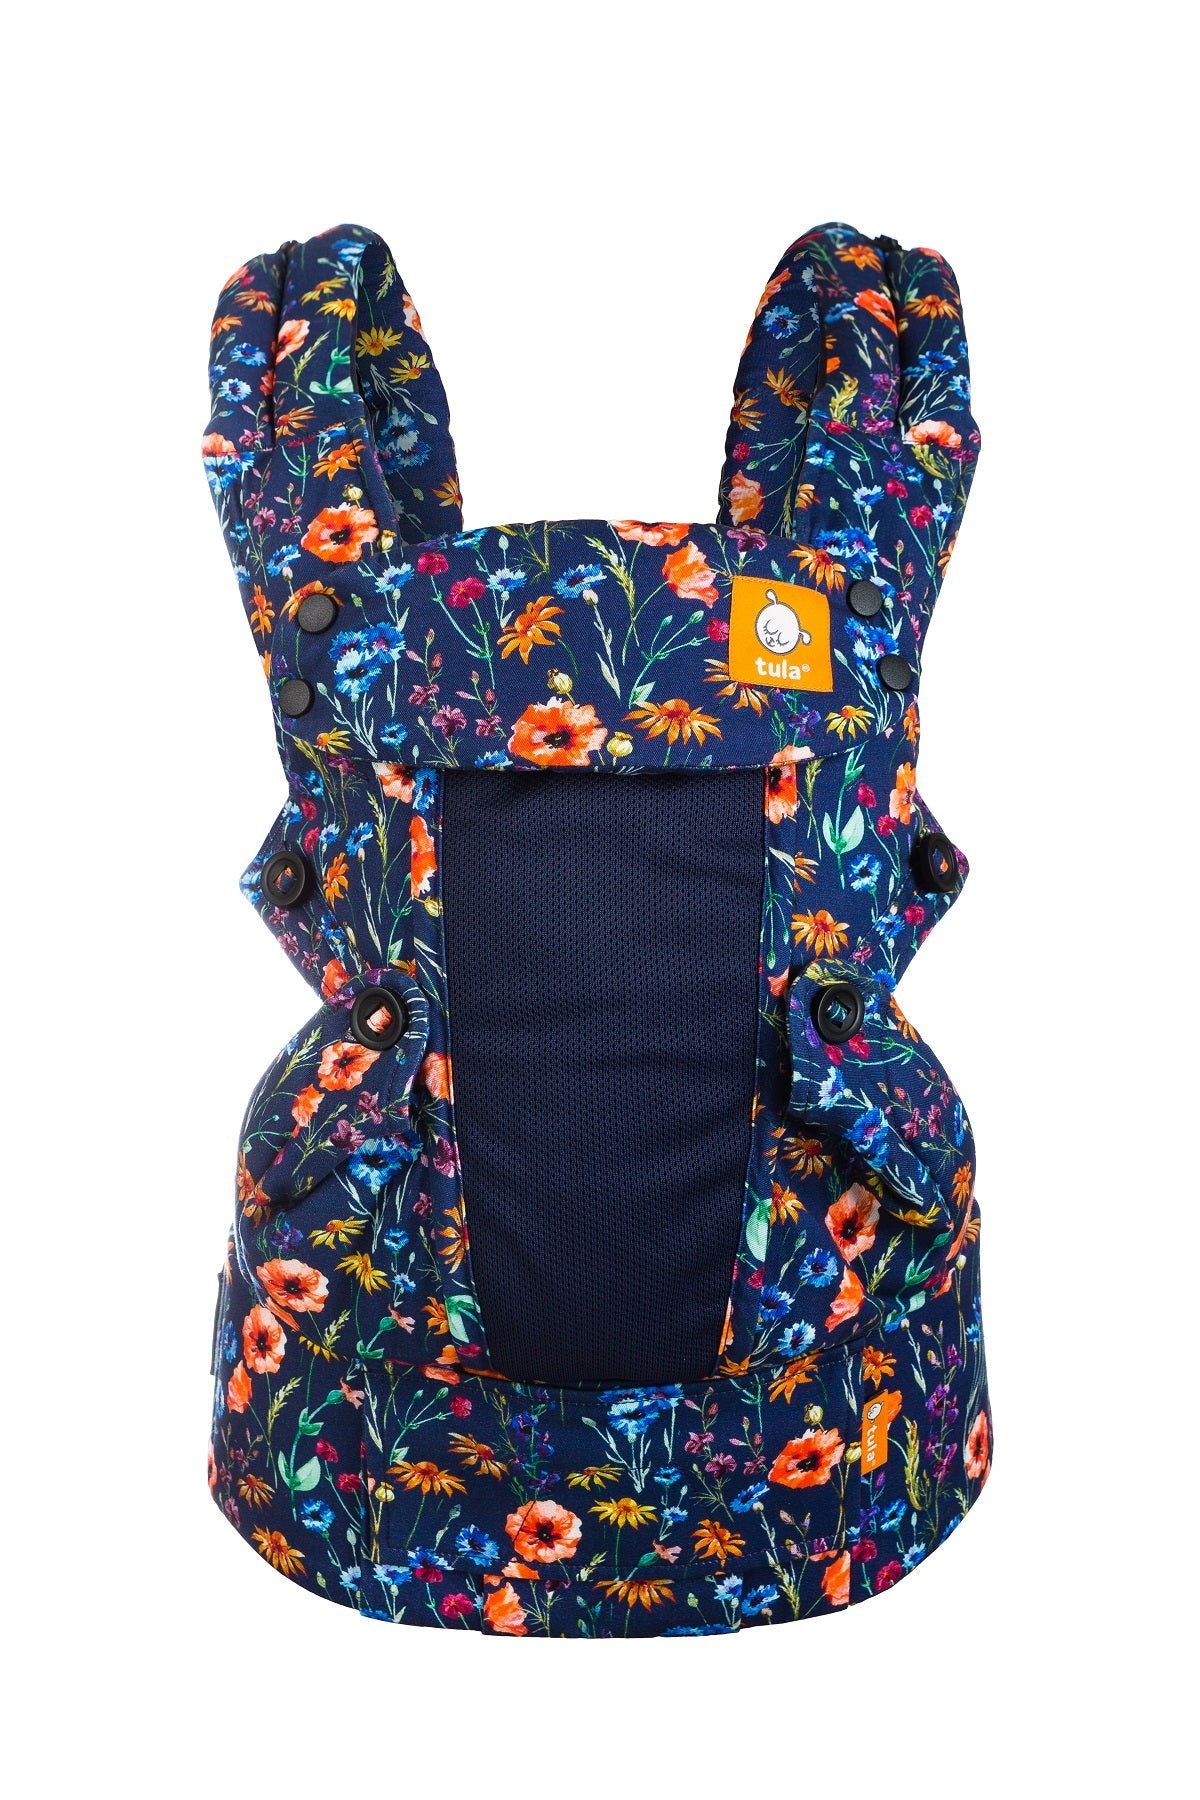 tula baby carrier floral